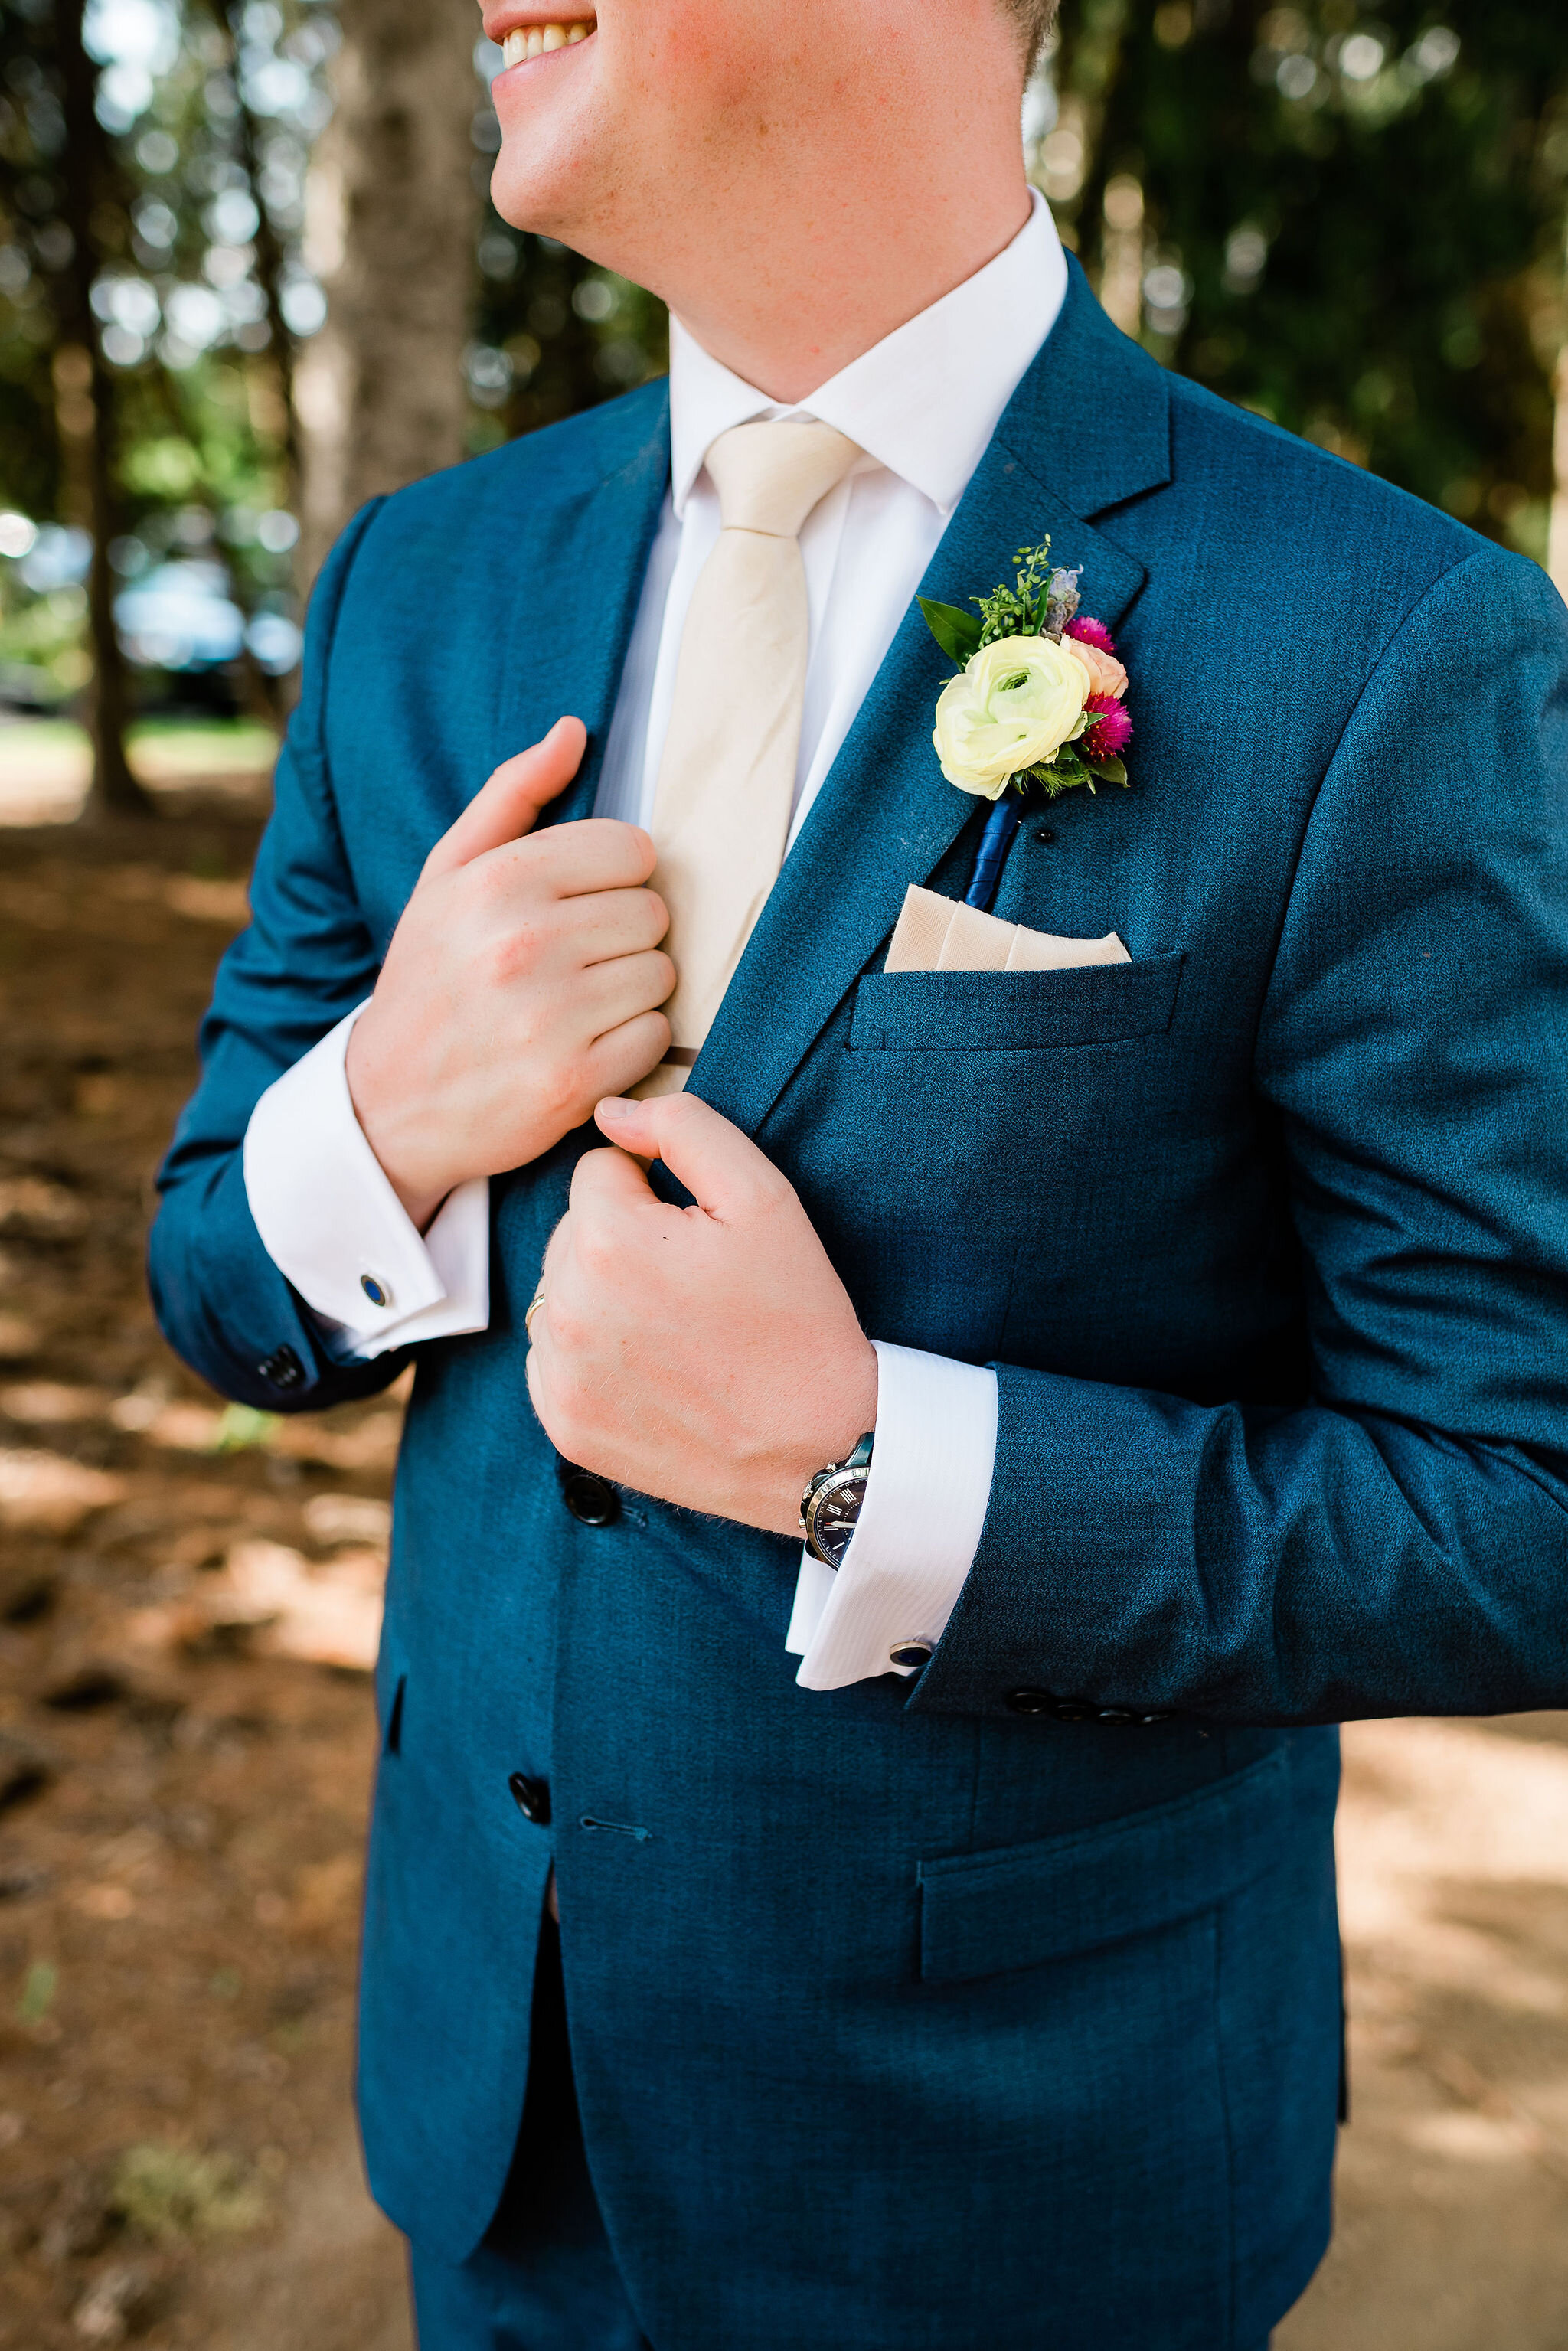 Groom holding his suit jacket